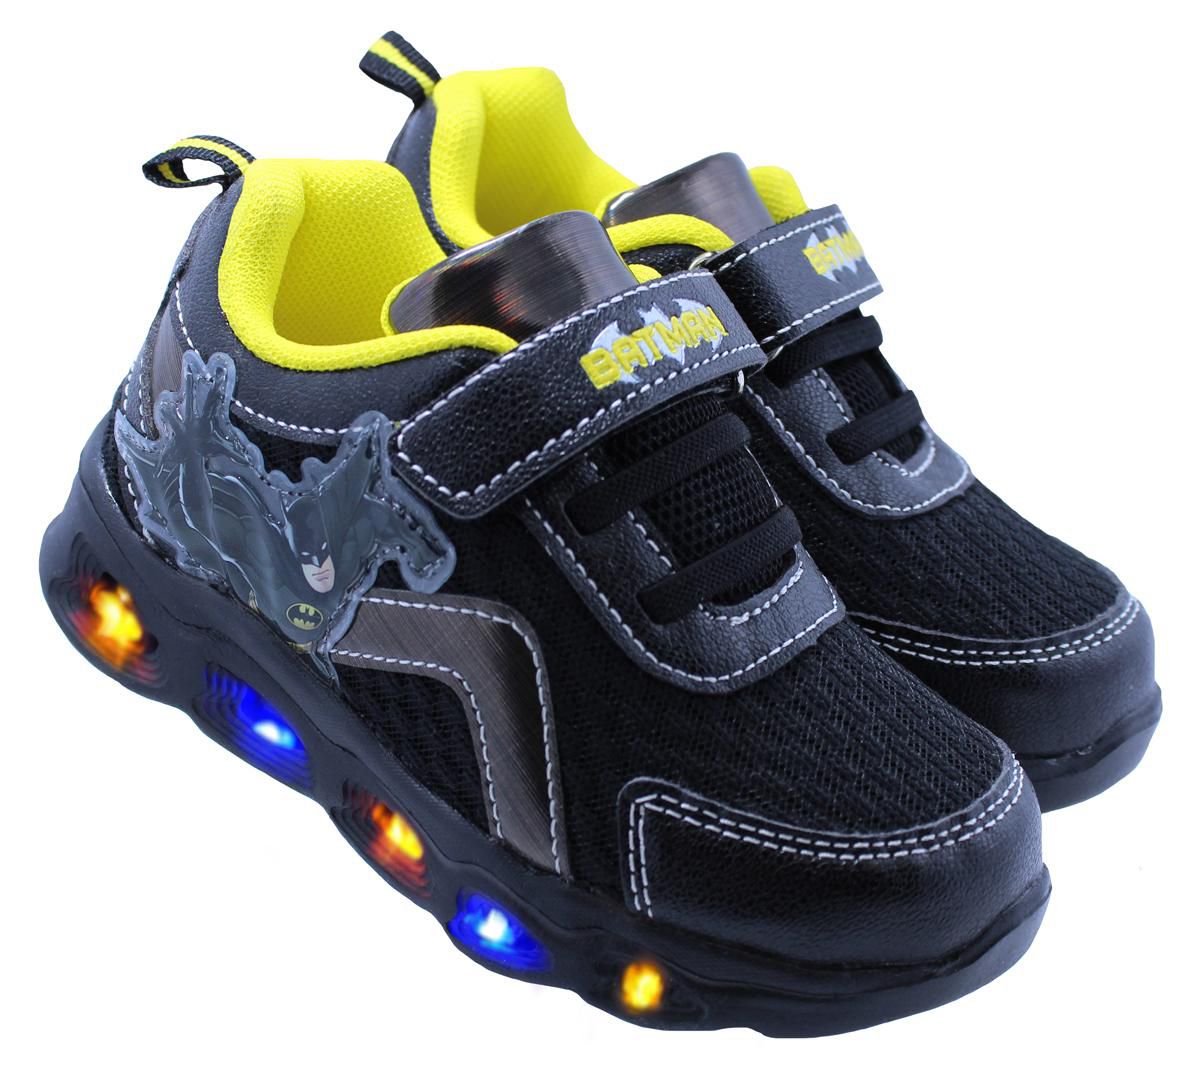 Lighted Batman Athletic Shoes for Toddler Boys | Walmart Canada